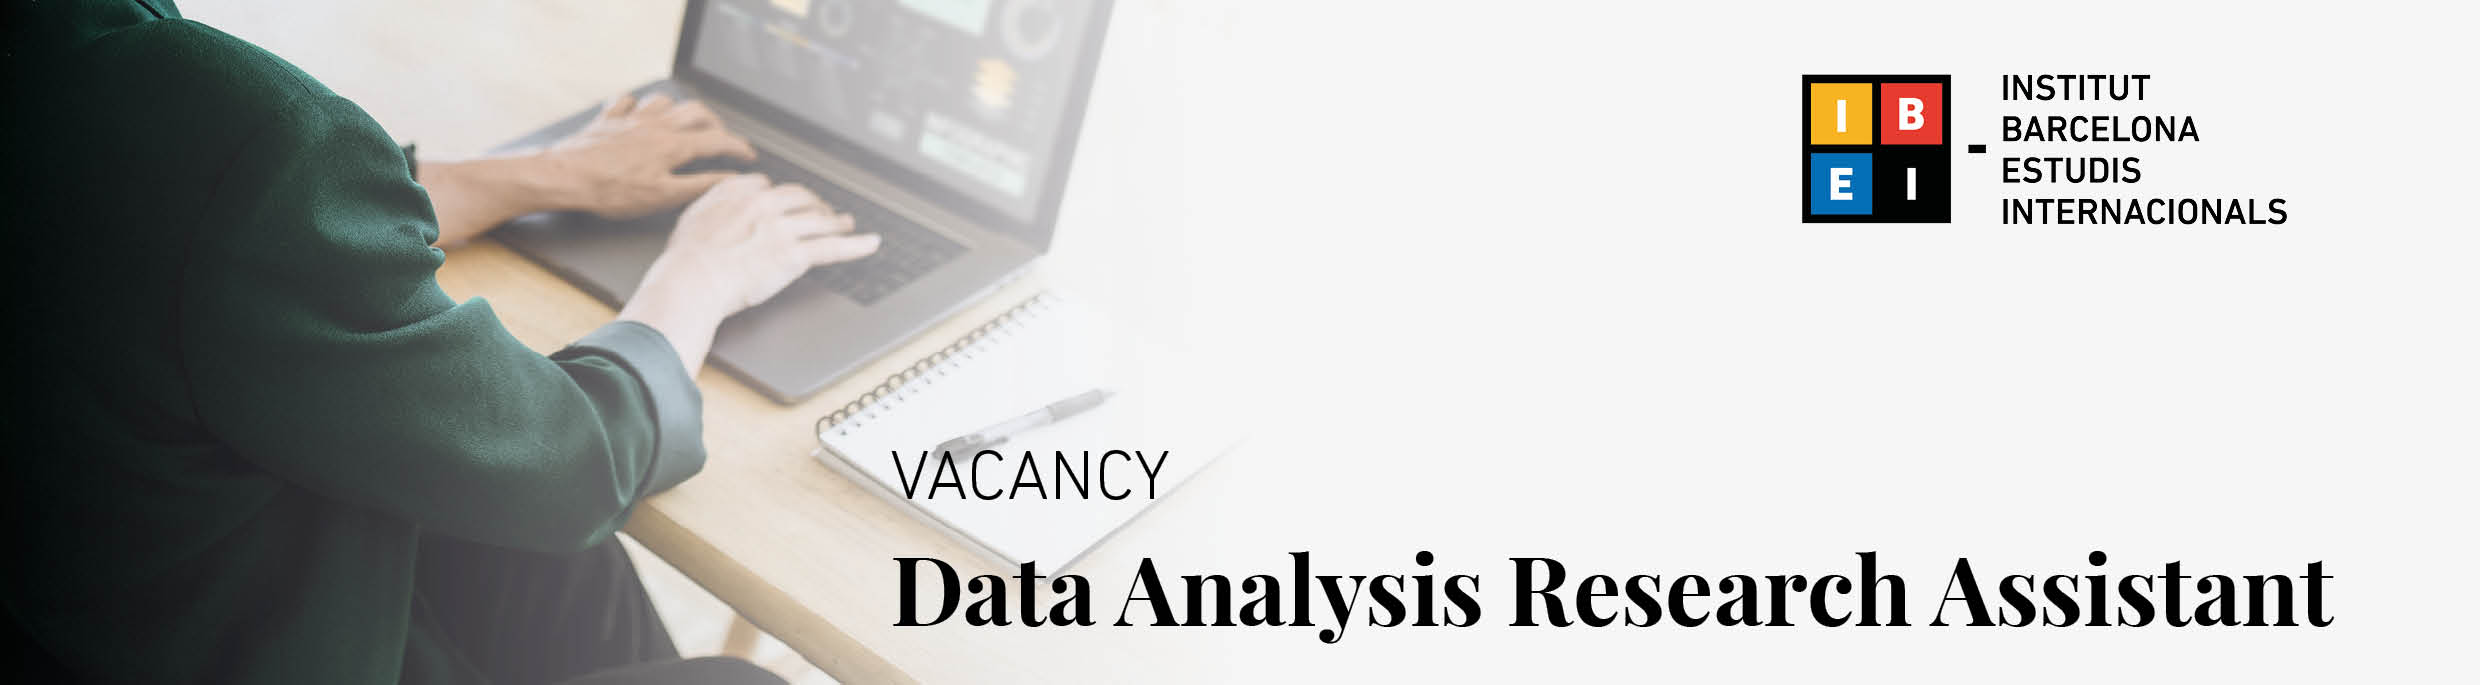 Data Analysis Research Assistant (ETHNICGOODS project)